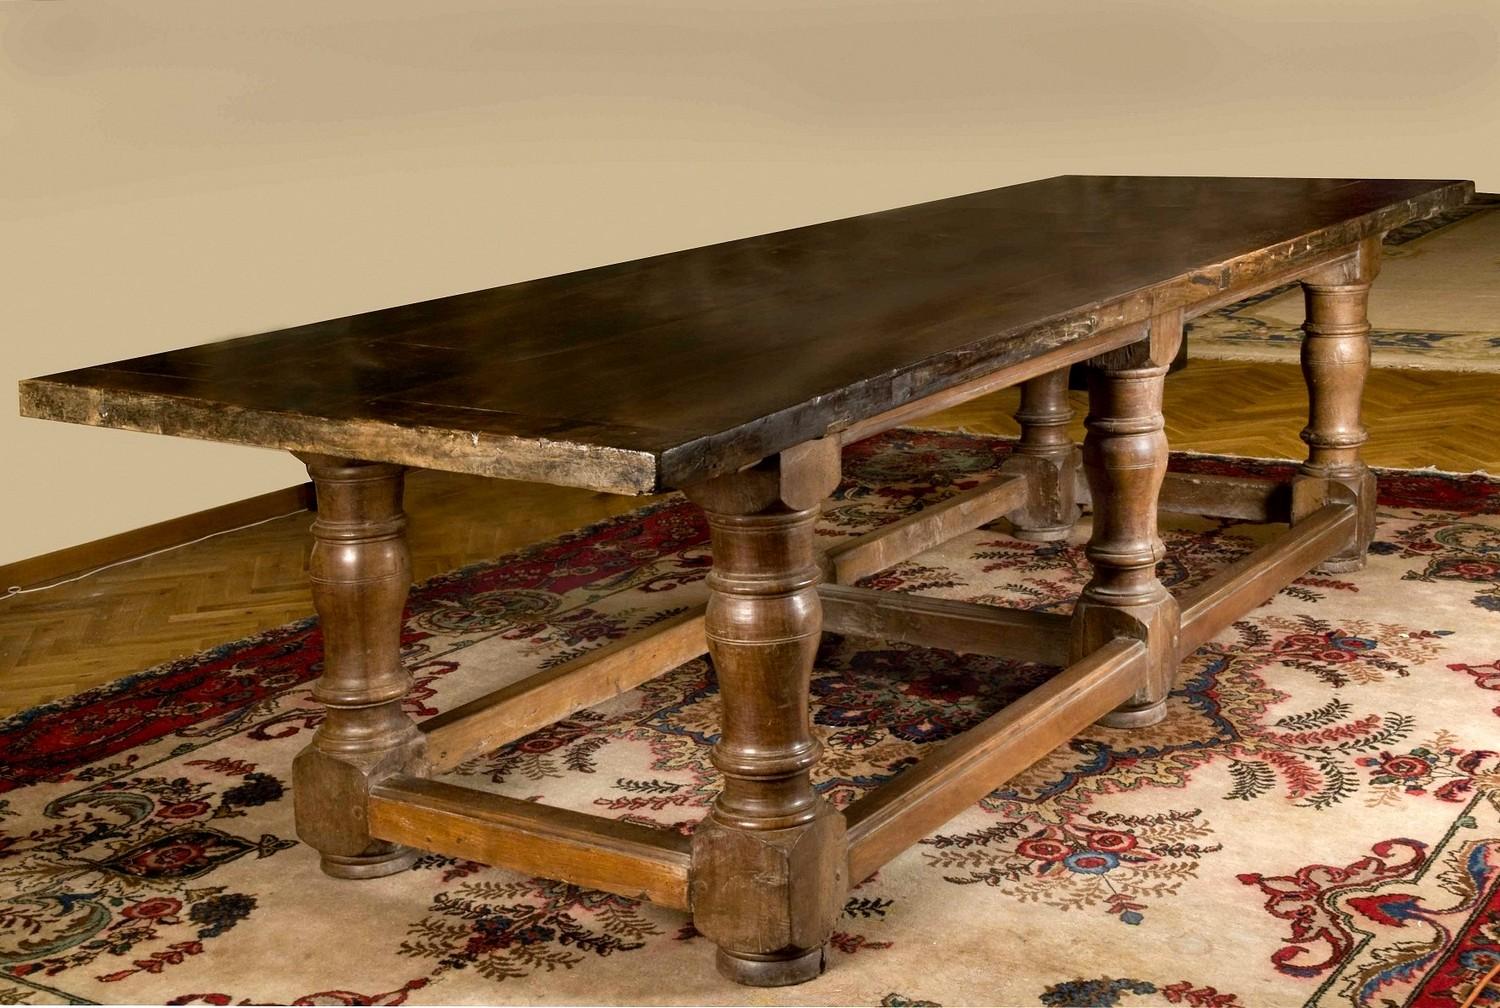 This charming 17th Century massive scale rectangular refectory table, dating back to Baroque period, is a magnificent example of Tuscan rustic craftsmanship.
The top consists of four large solid warm brow walnut planks capped on either end with